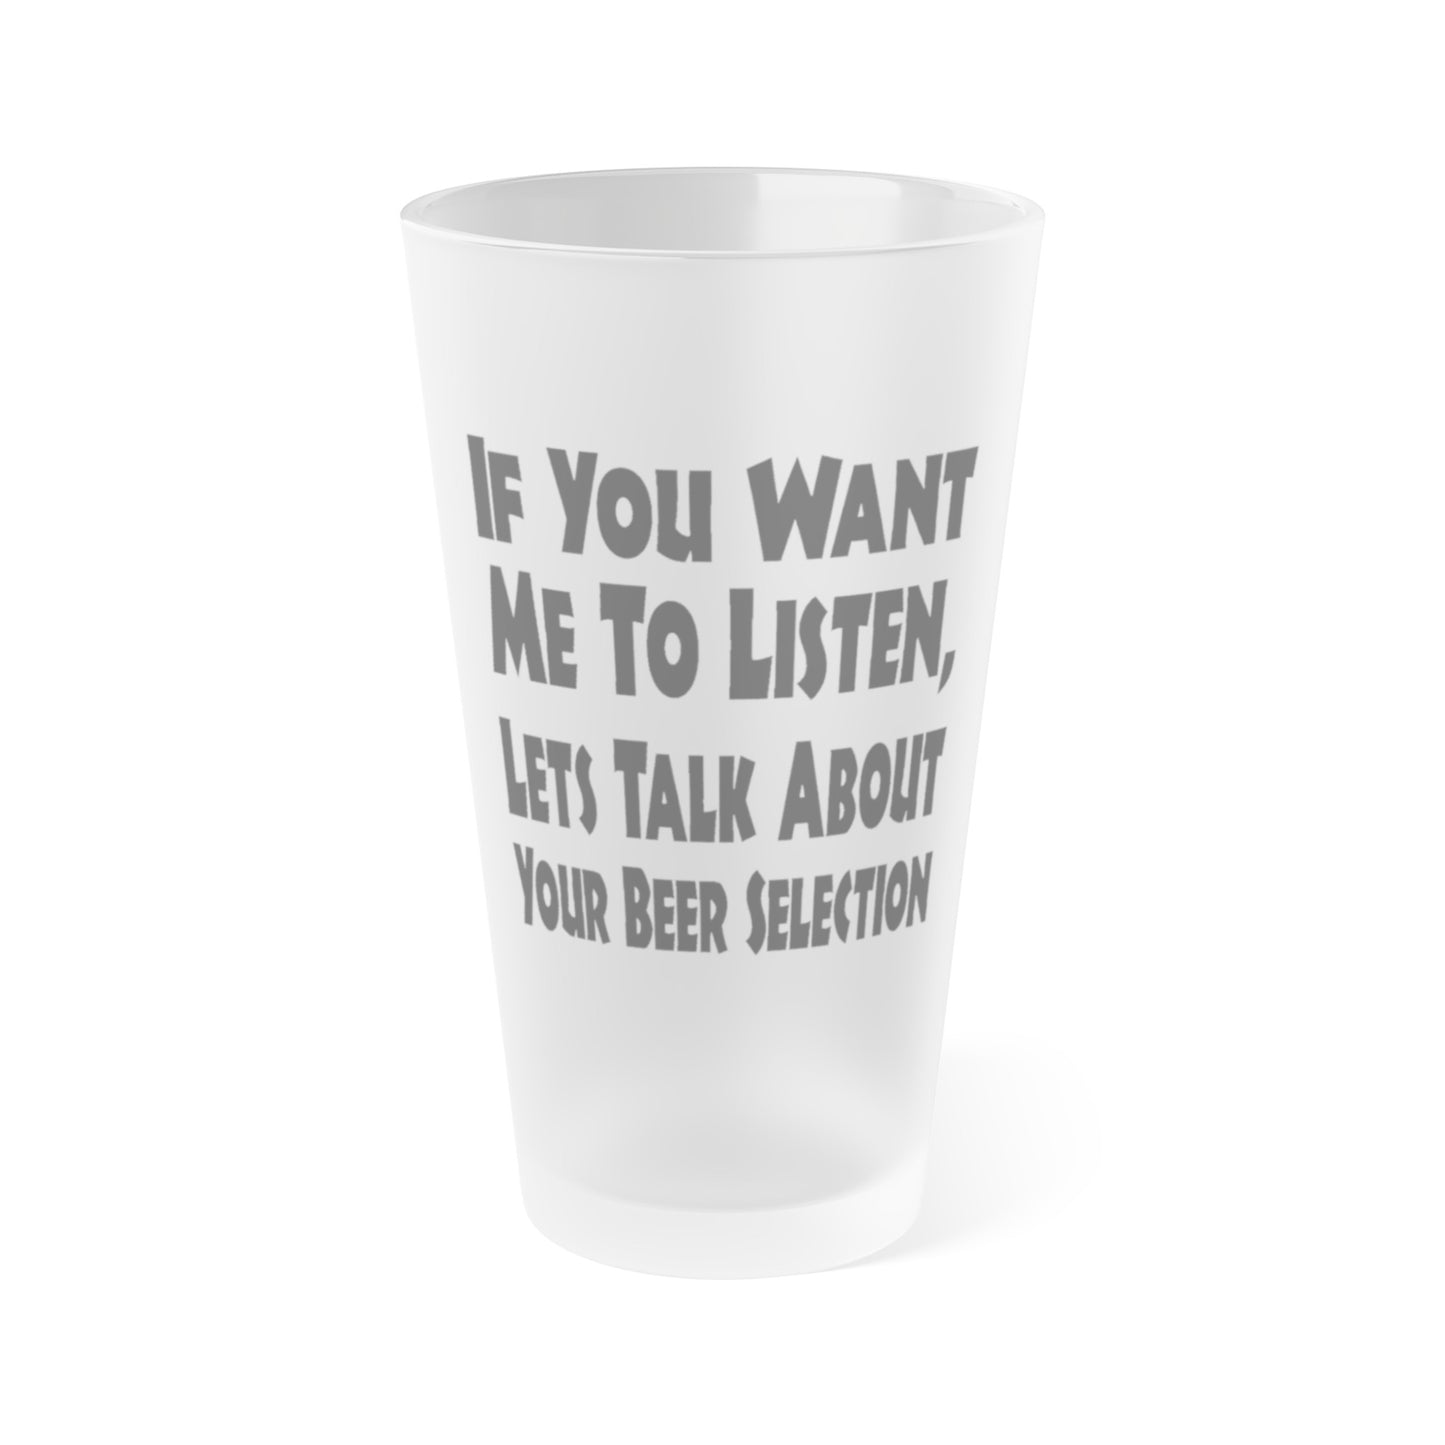 Lets Talk About Your Beer Selection - Frosted Pint Glass, 16oz